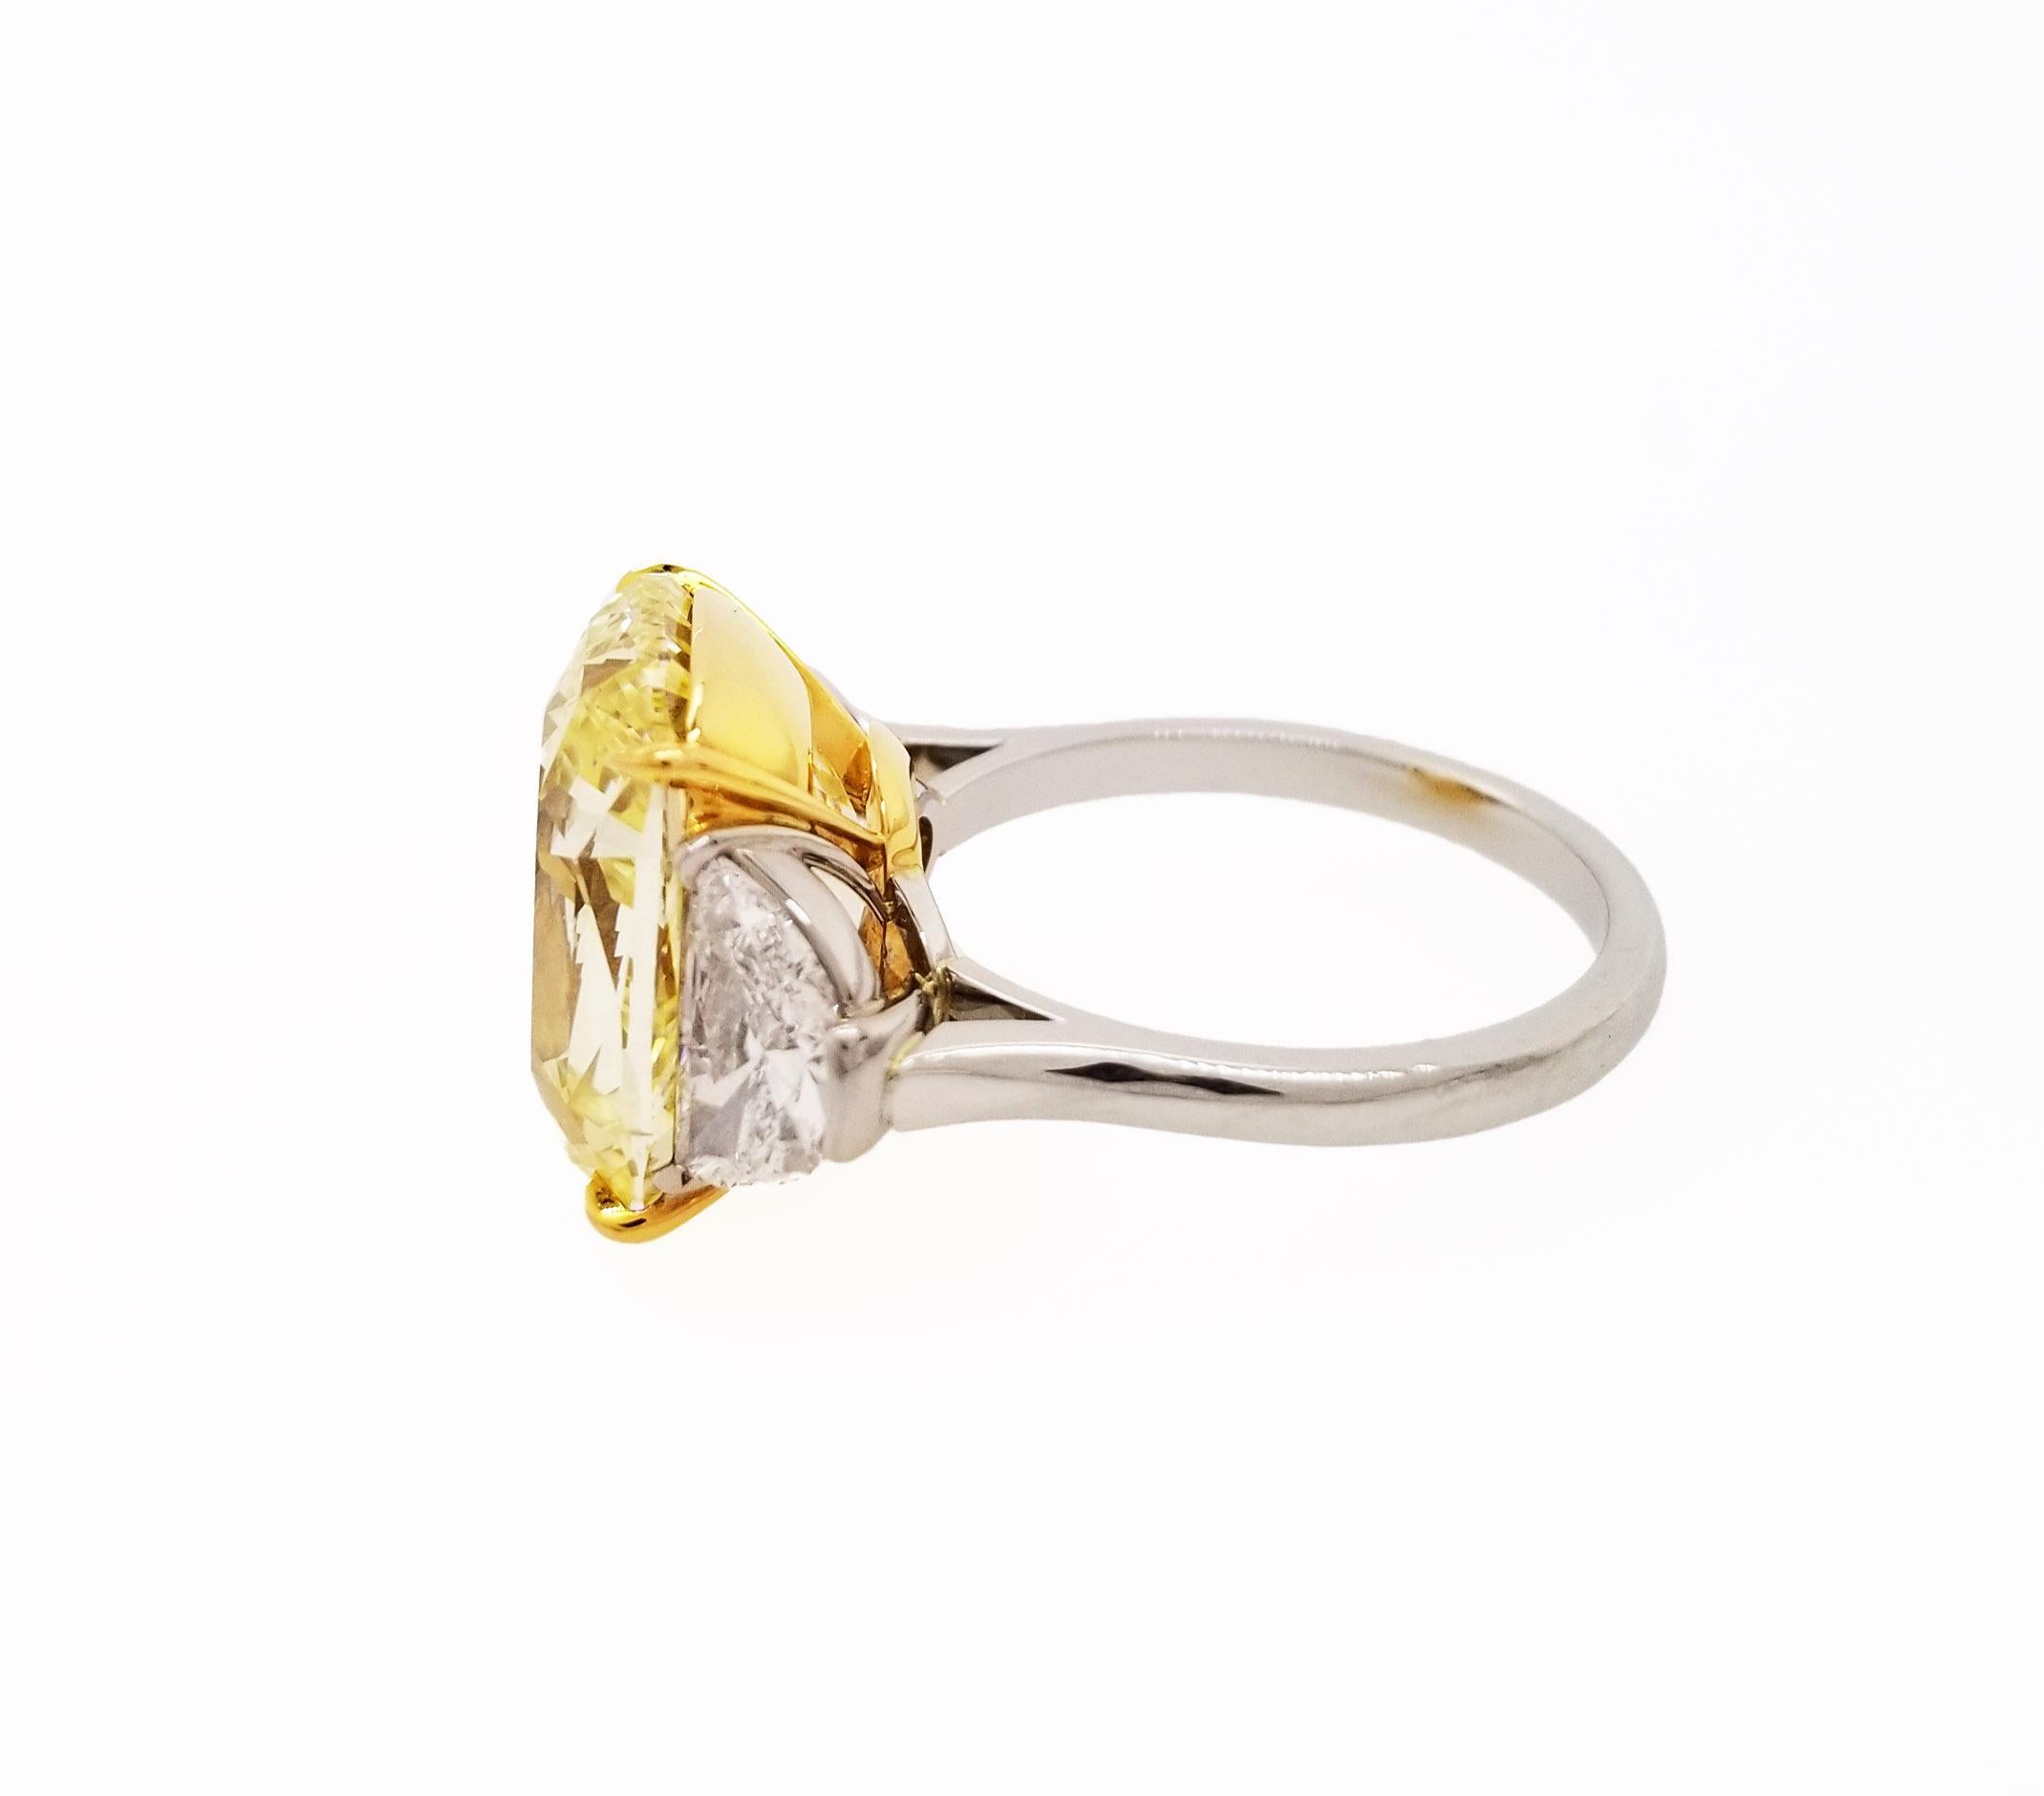 Cushion Cut SCARSELLI 11 Carat Fancy Yellow Diamond Engagement Ring in Platinum For Sale